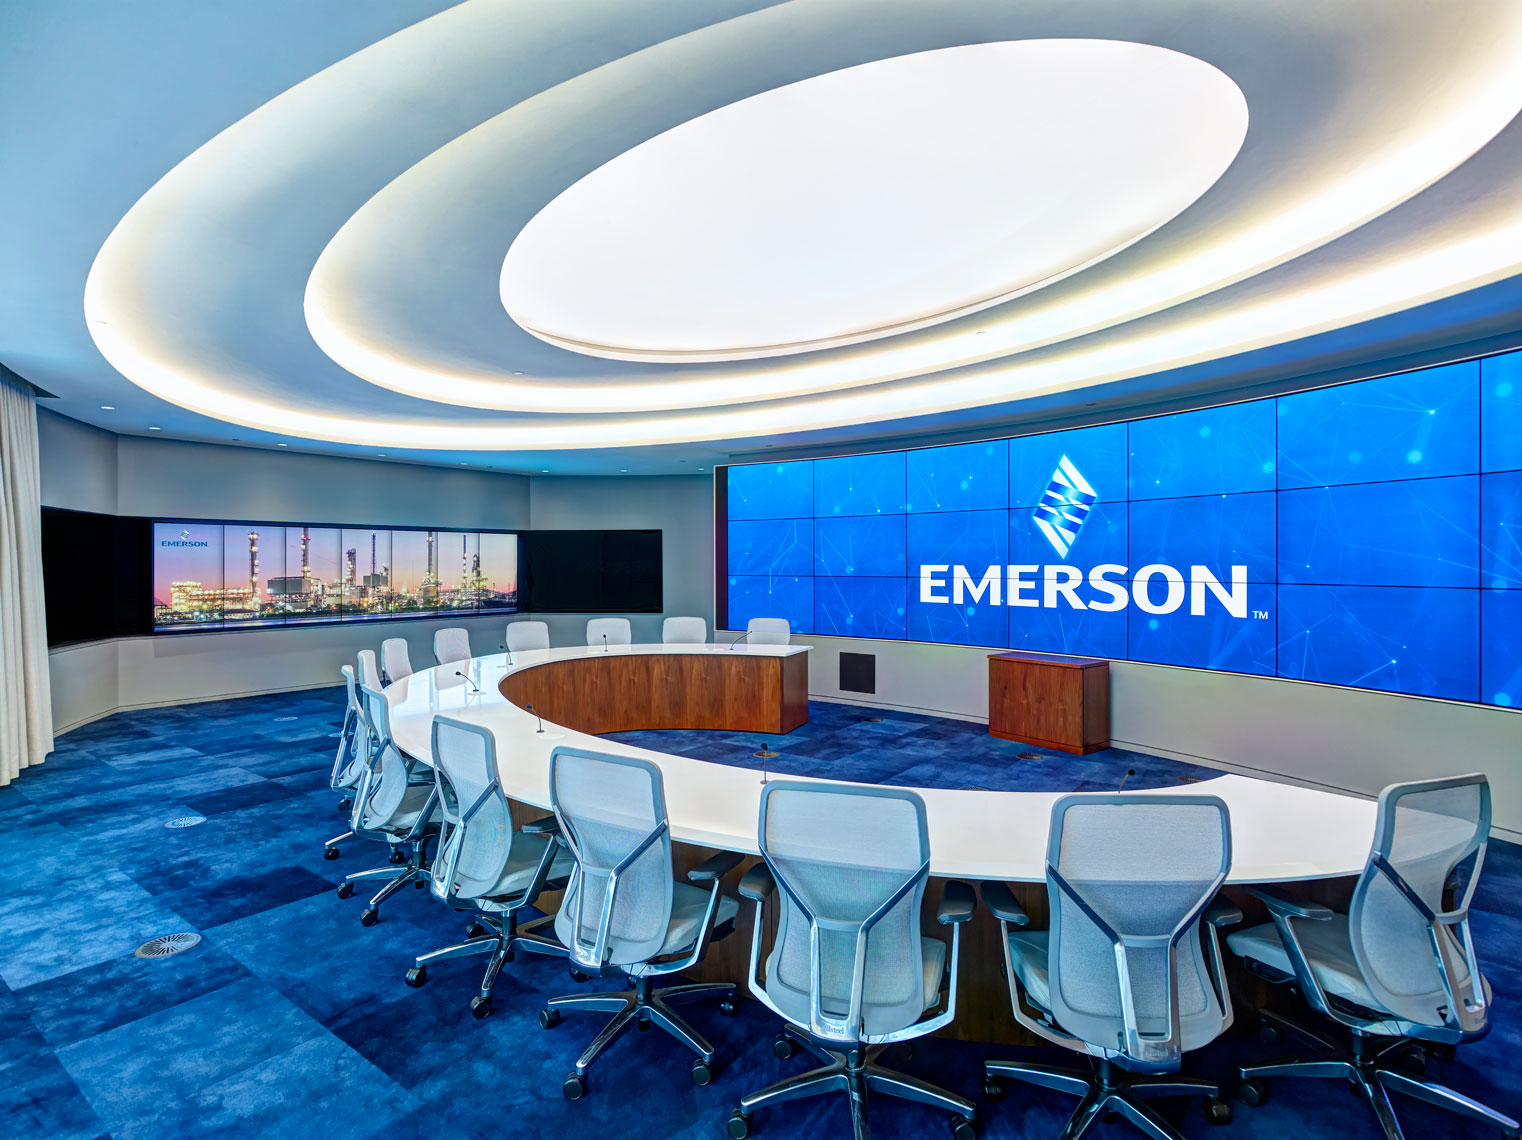 Emerson conf. room/architectural photography